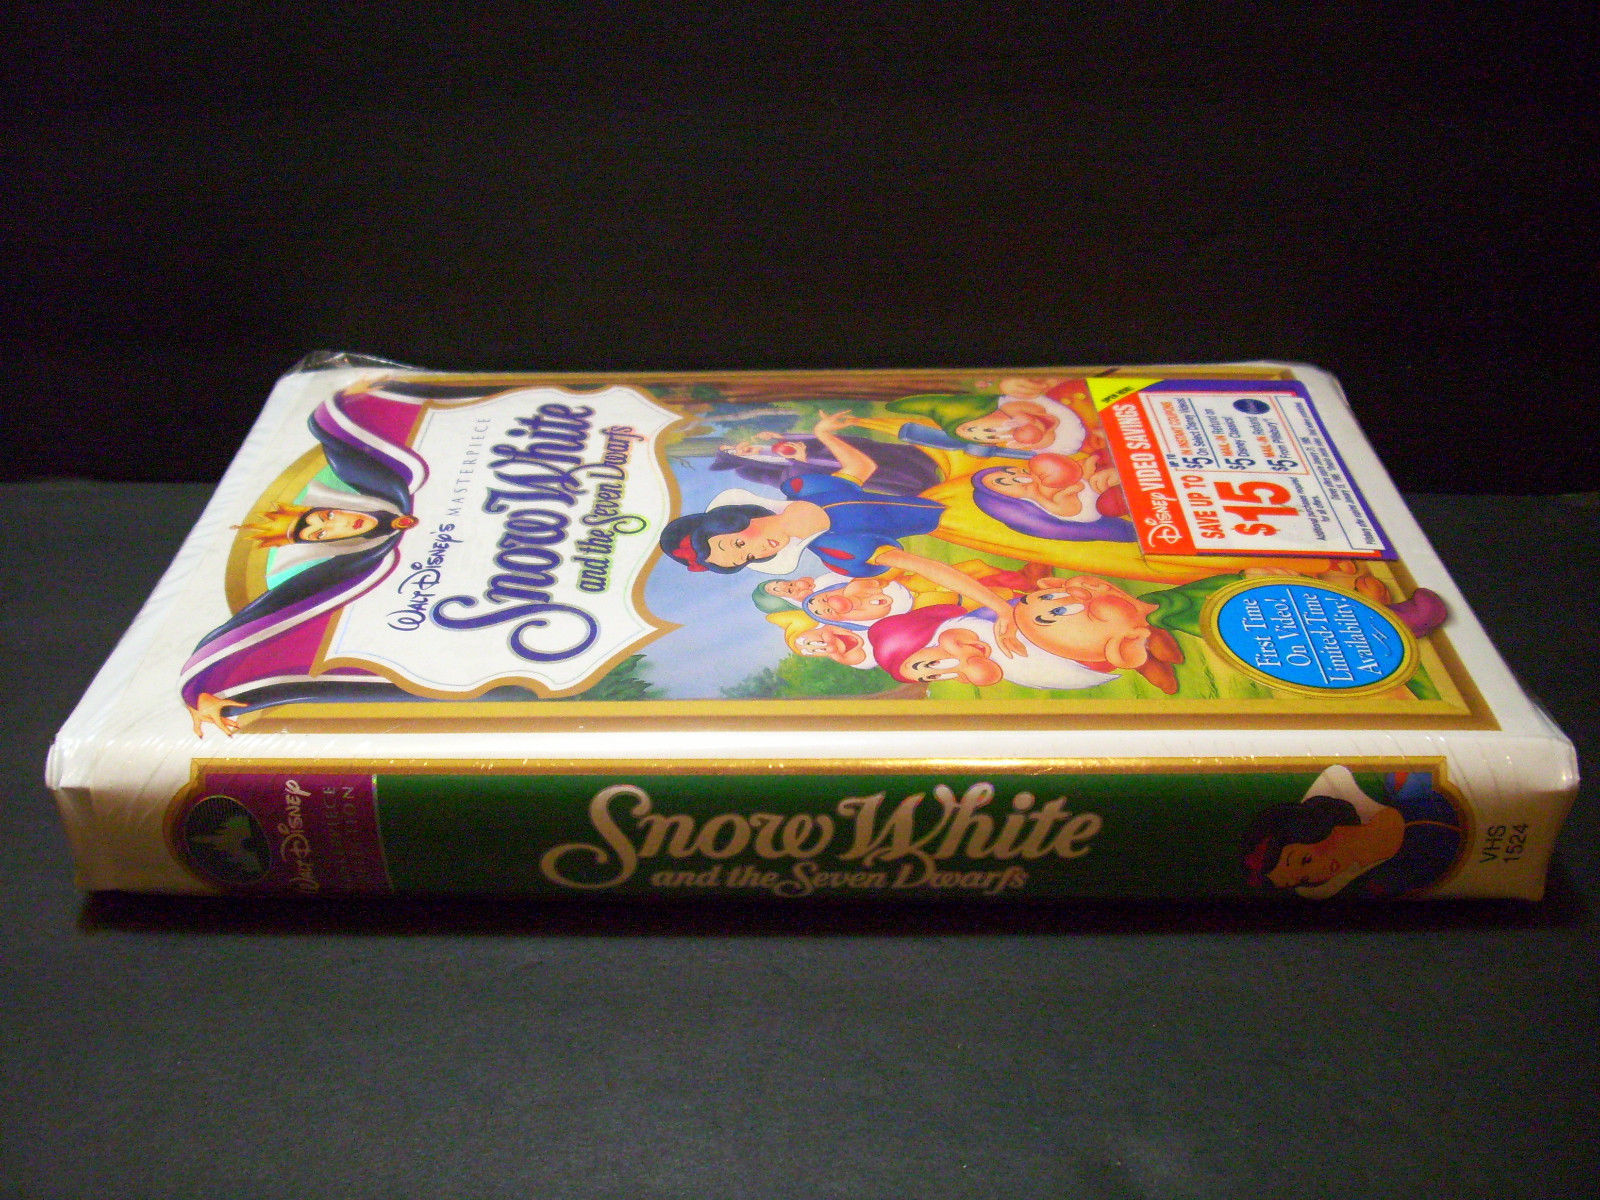 Sealed Snow White And The Seven Dwarfs Vhs 1994 Walt Disney Masterpiece Collection Vhs Tapes 